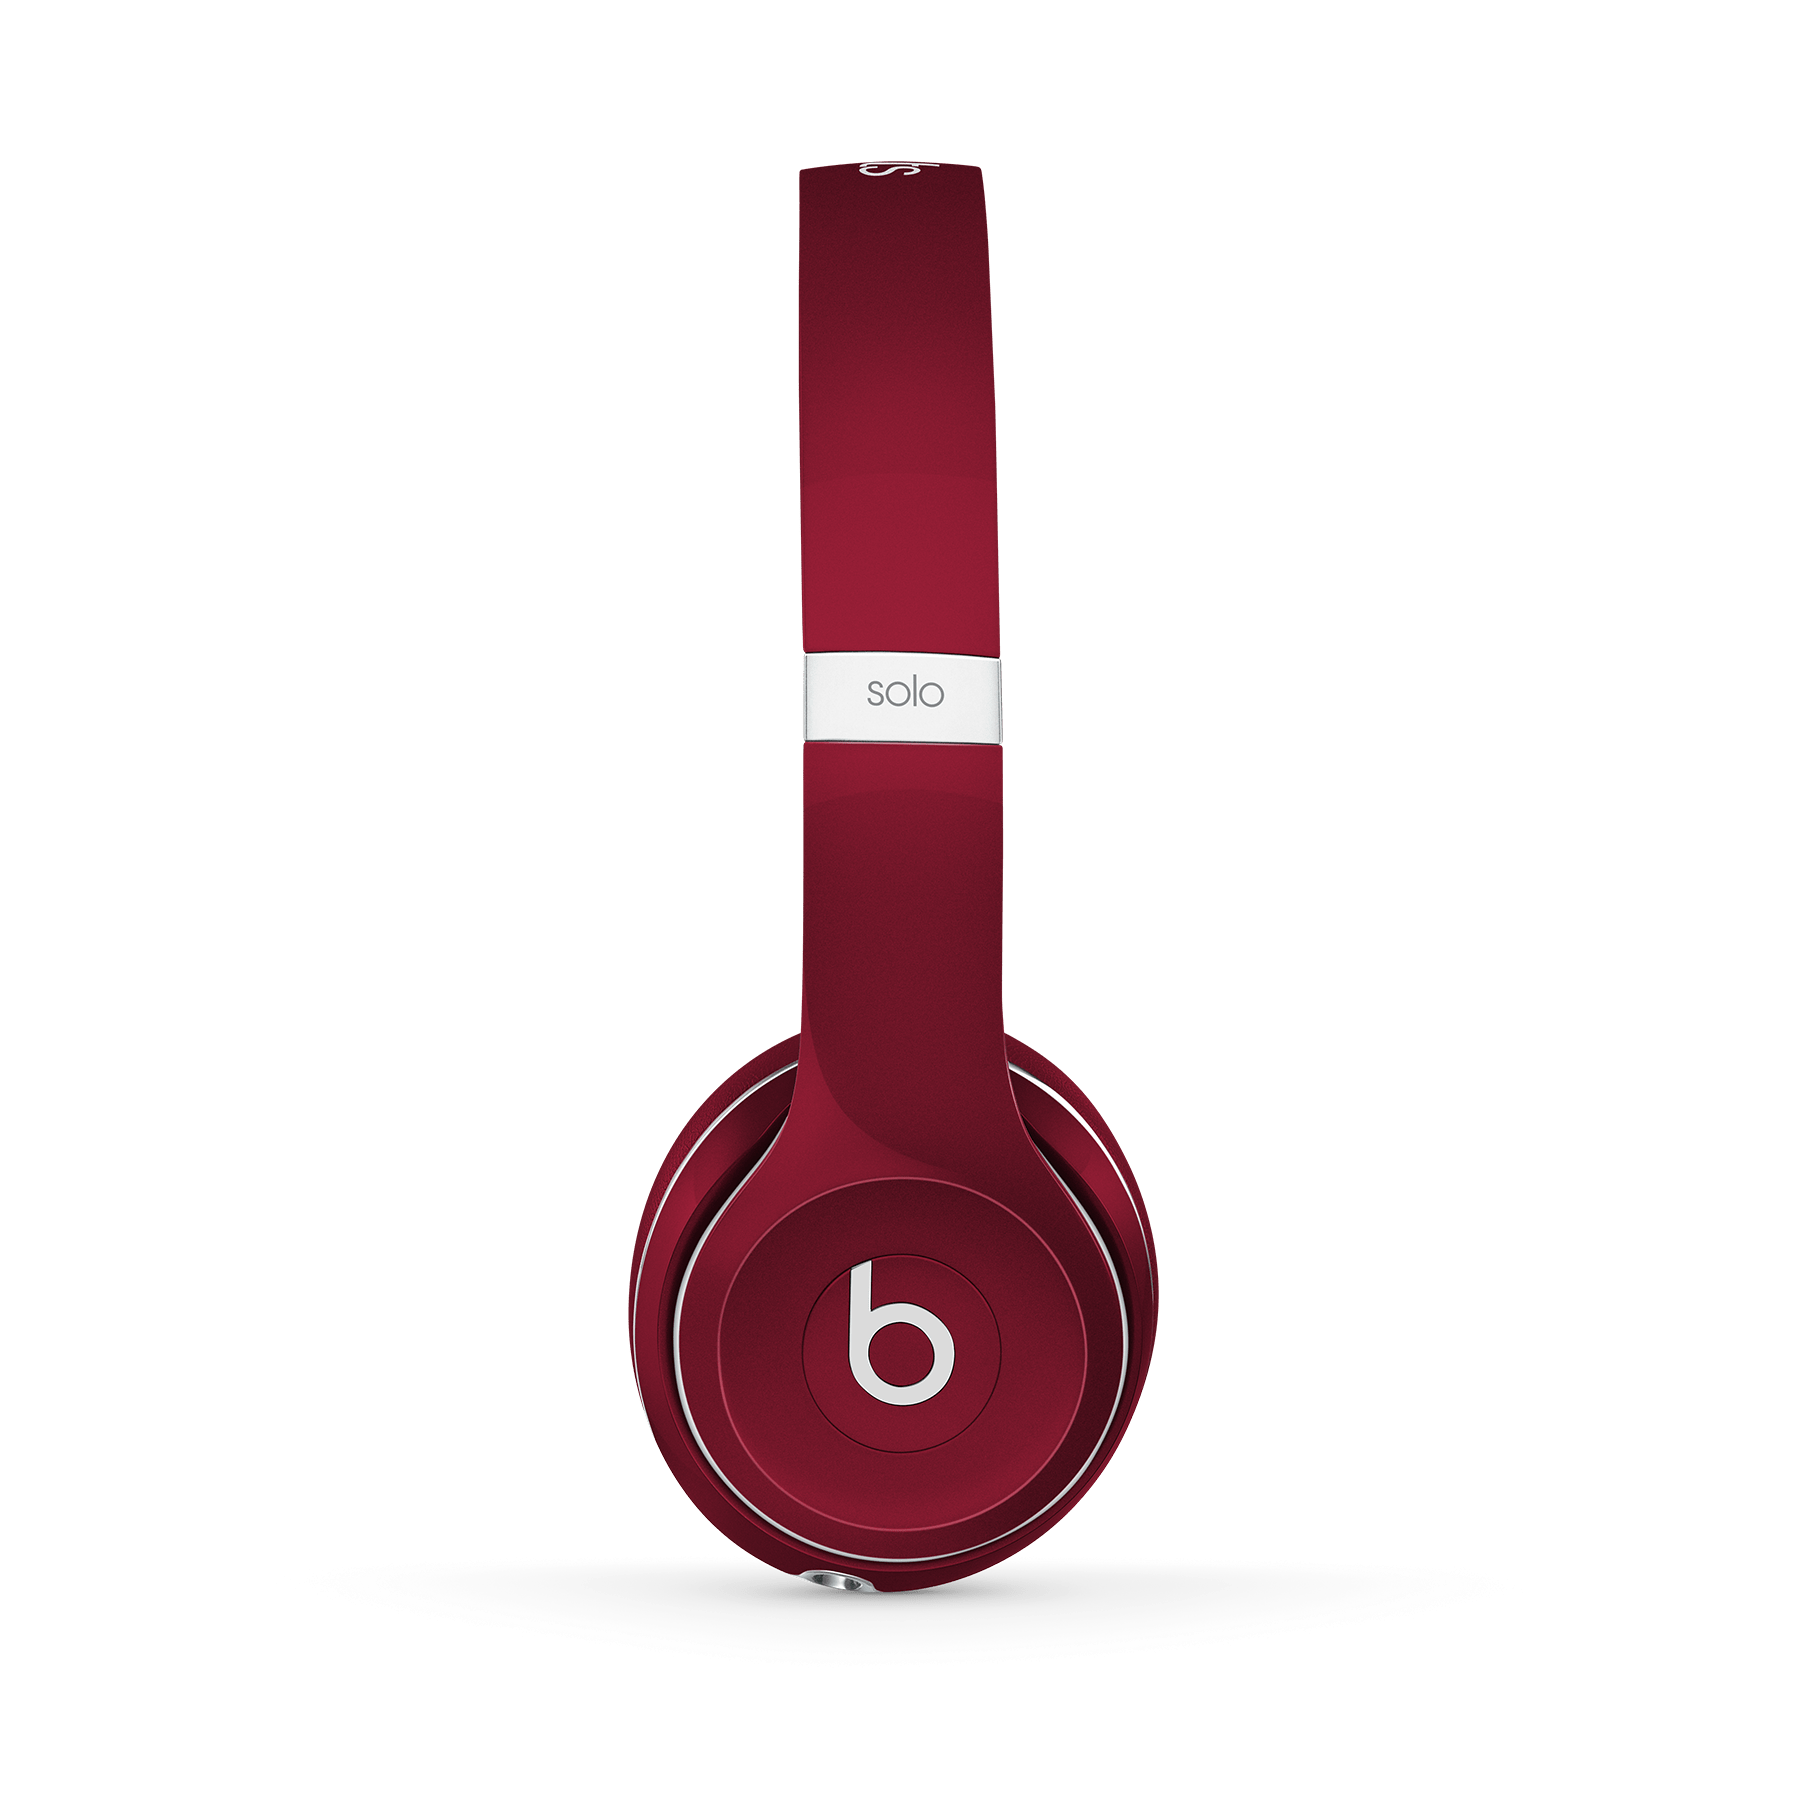 beats solo 2 red and black